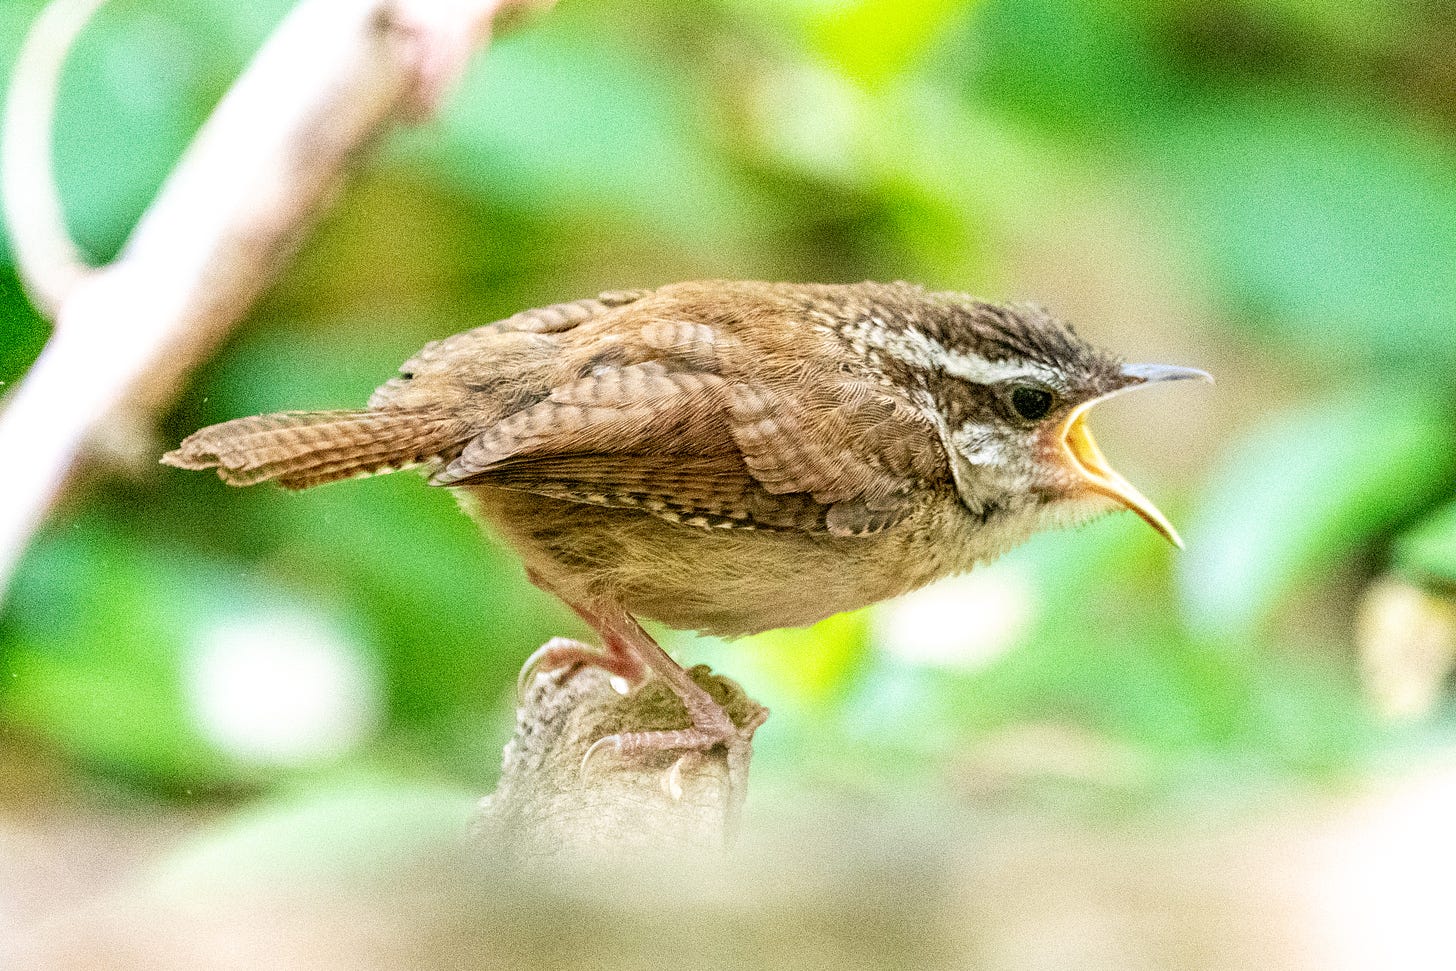 A fledgling Carolina wren, leaning forward and squawking for grub with wide-open beak